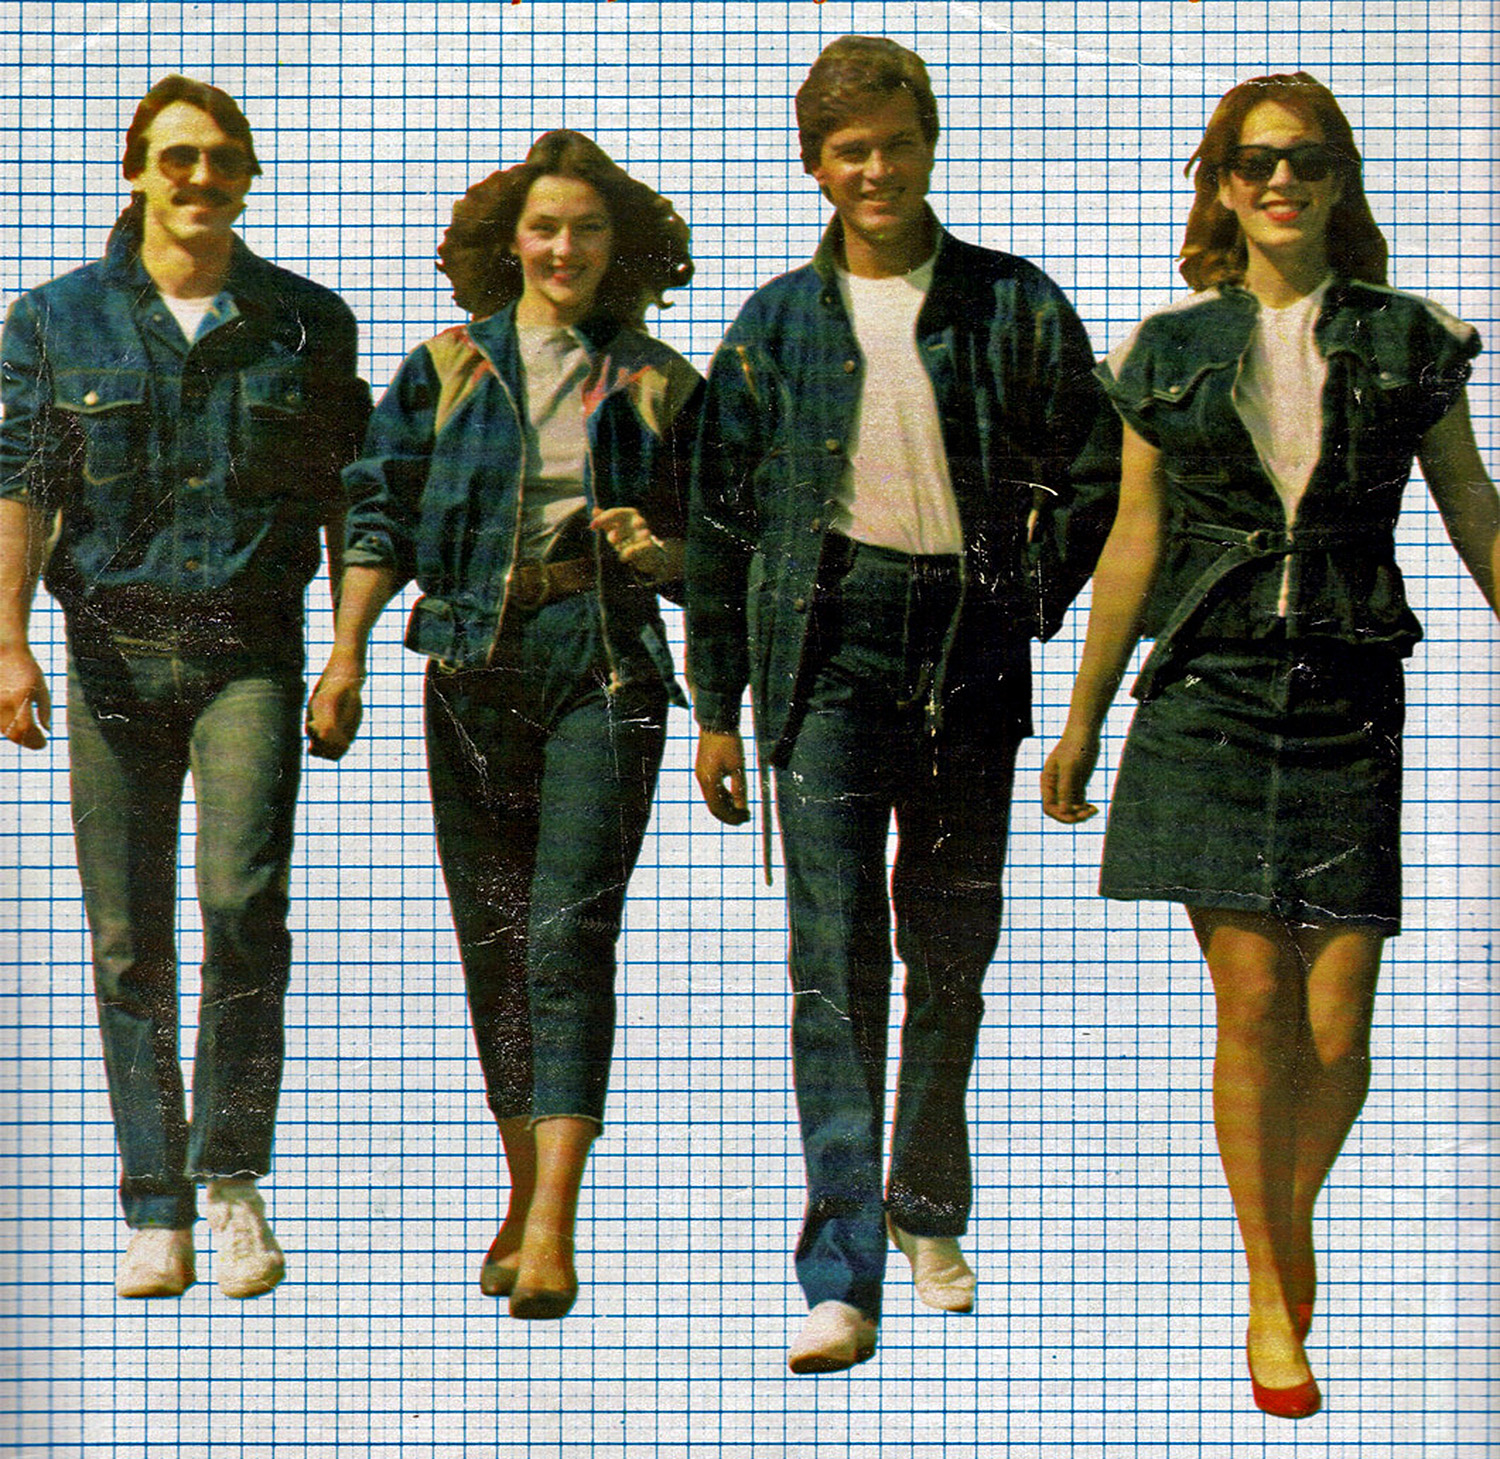 Huh Modish closet Decade of Denim: Jeans Ads and Fashions from the 1970s - Flashbak